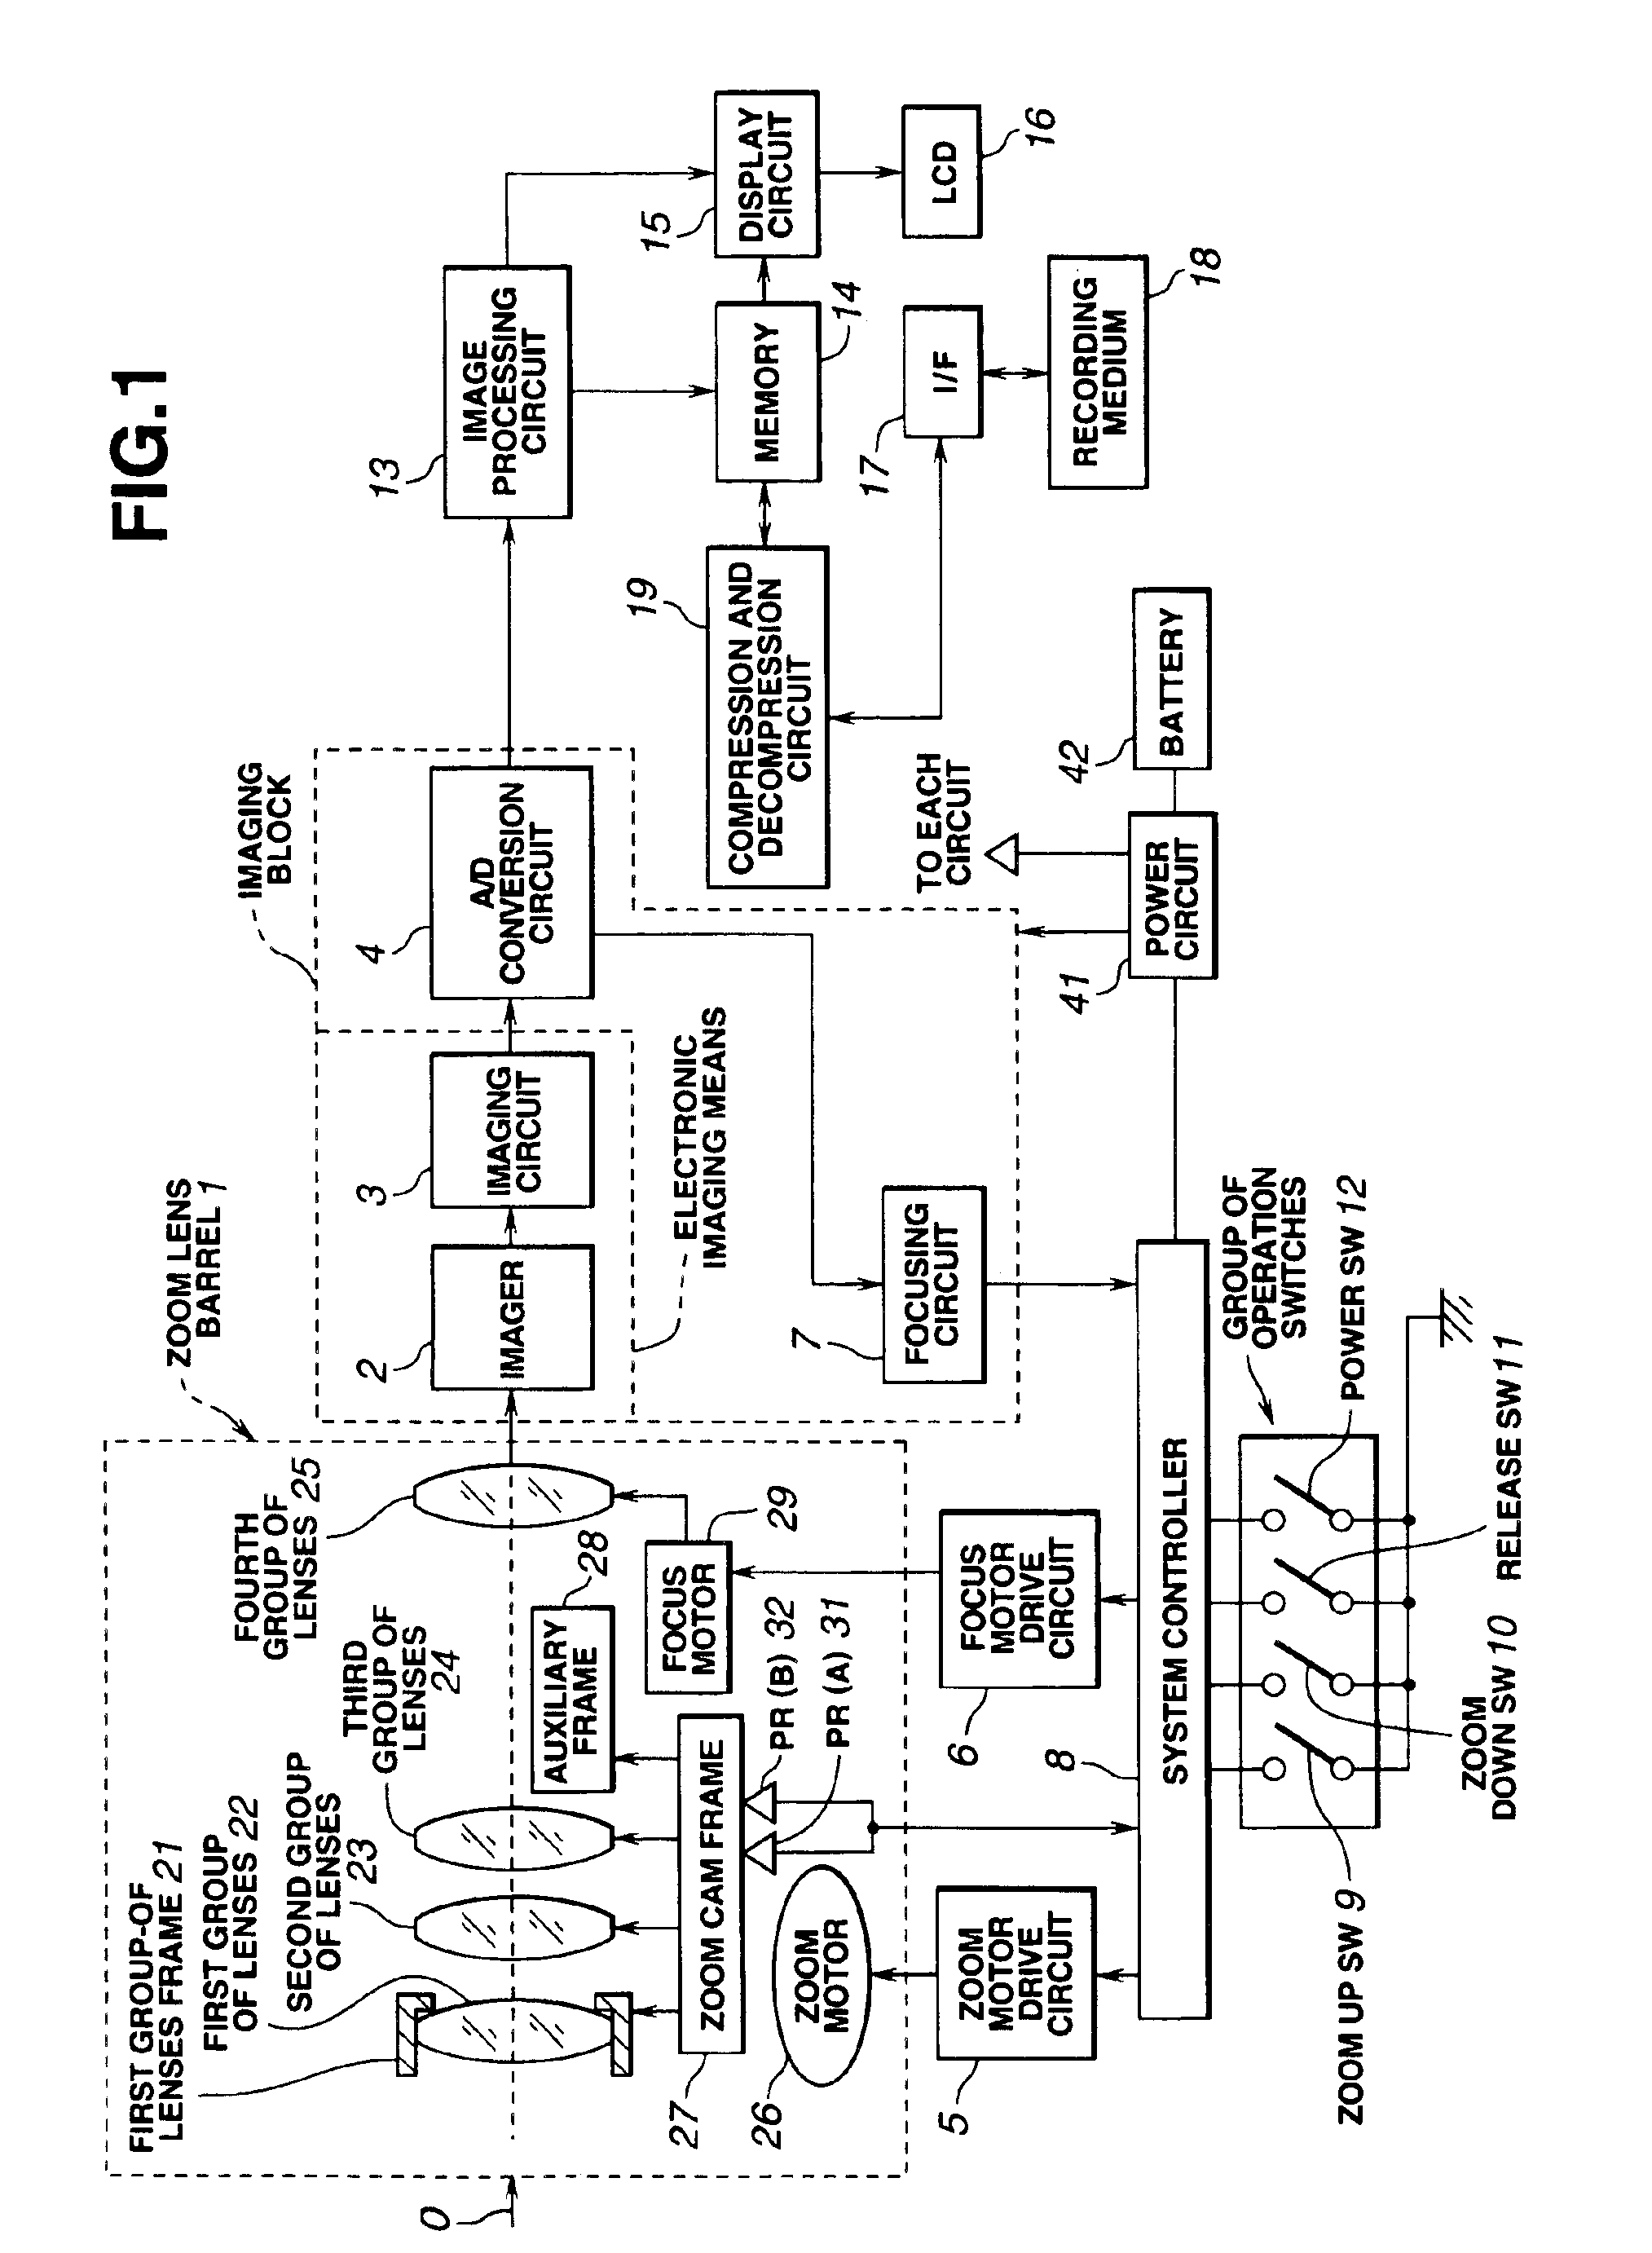 Lens device for a camera with a stepping motor drive optimized for speed and power saving